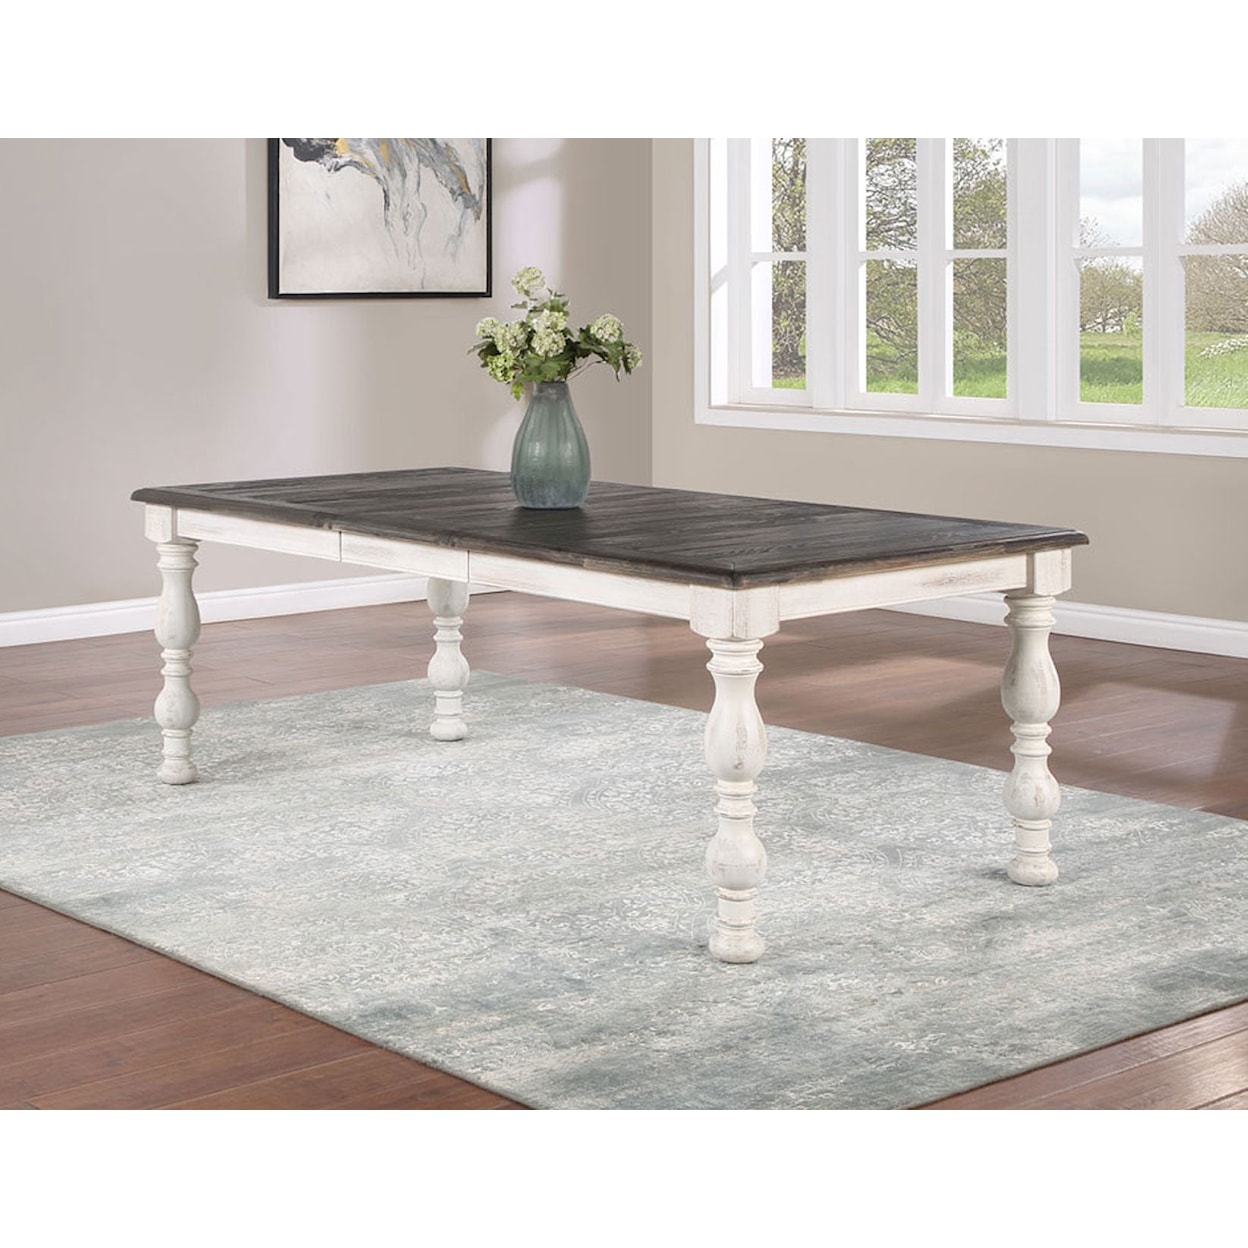 Steve Silver Heston Dining Table with 18-Inch Table Leaf